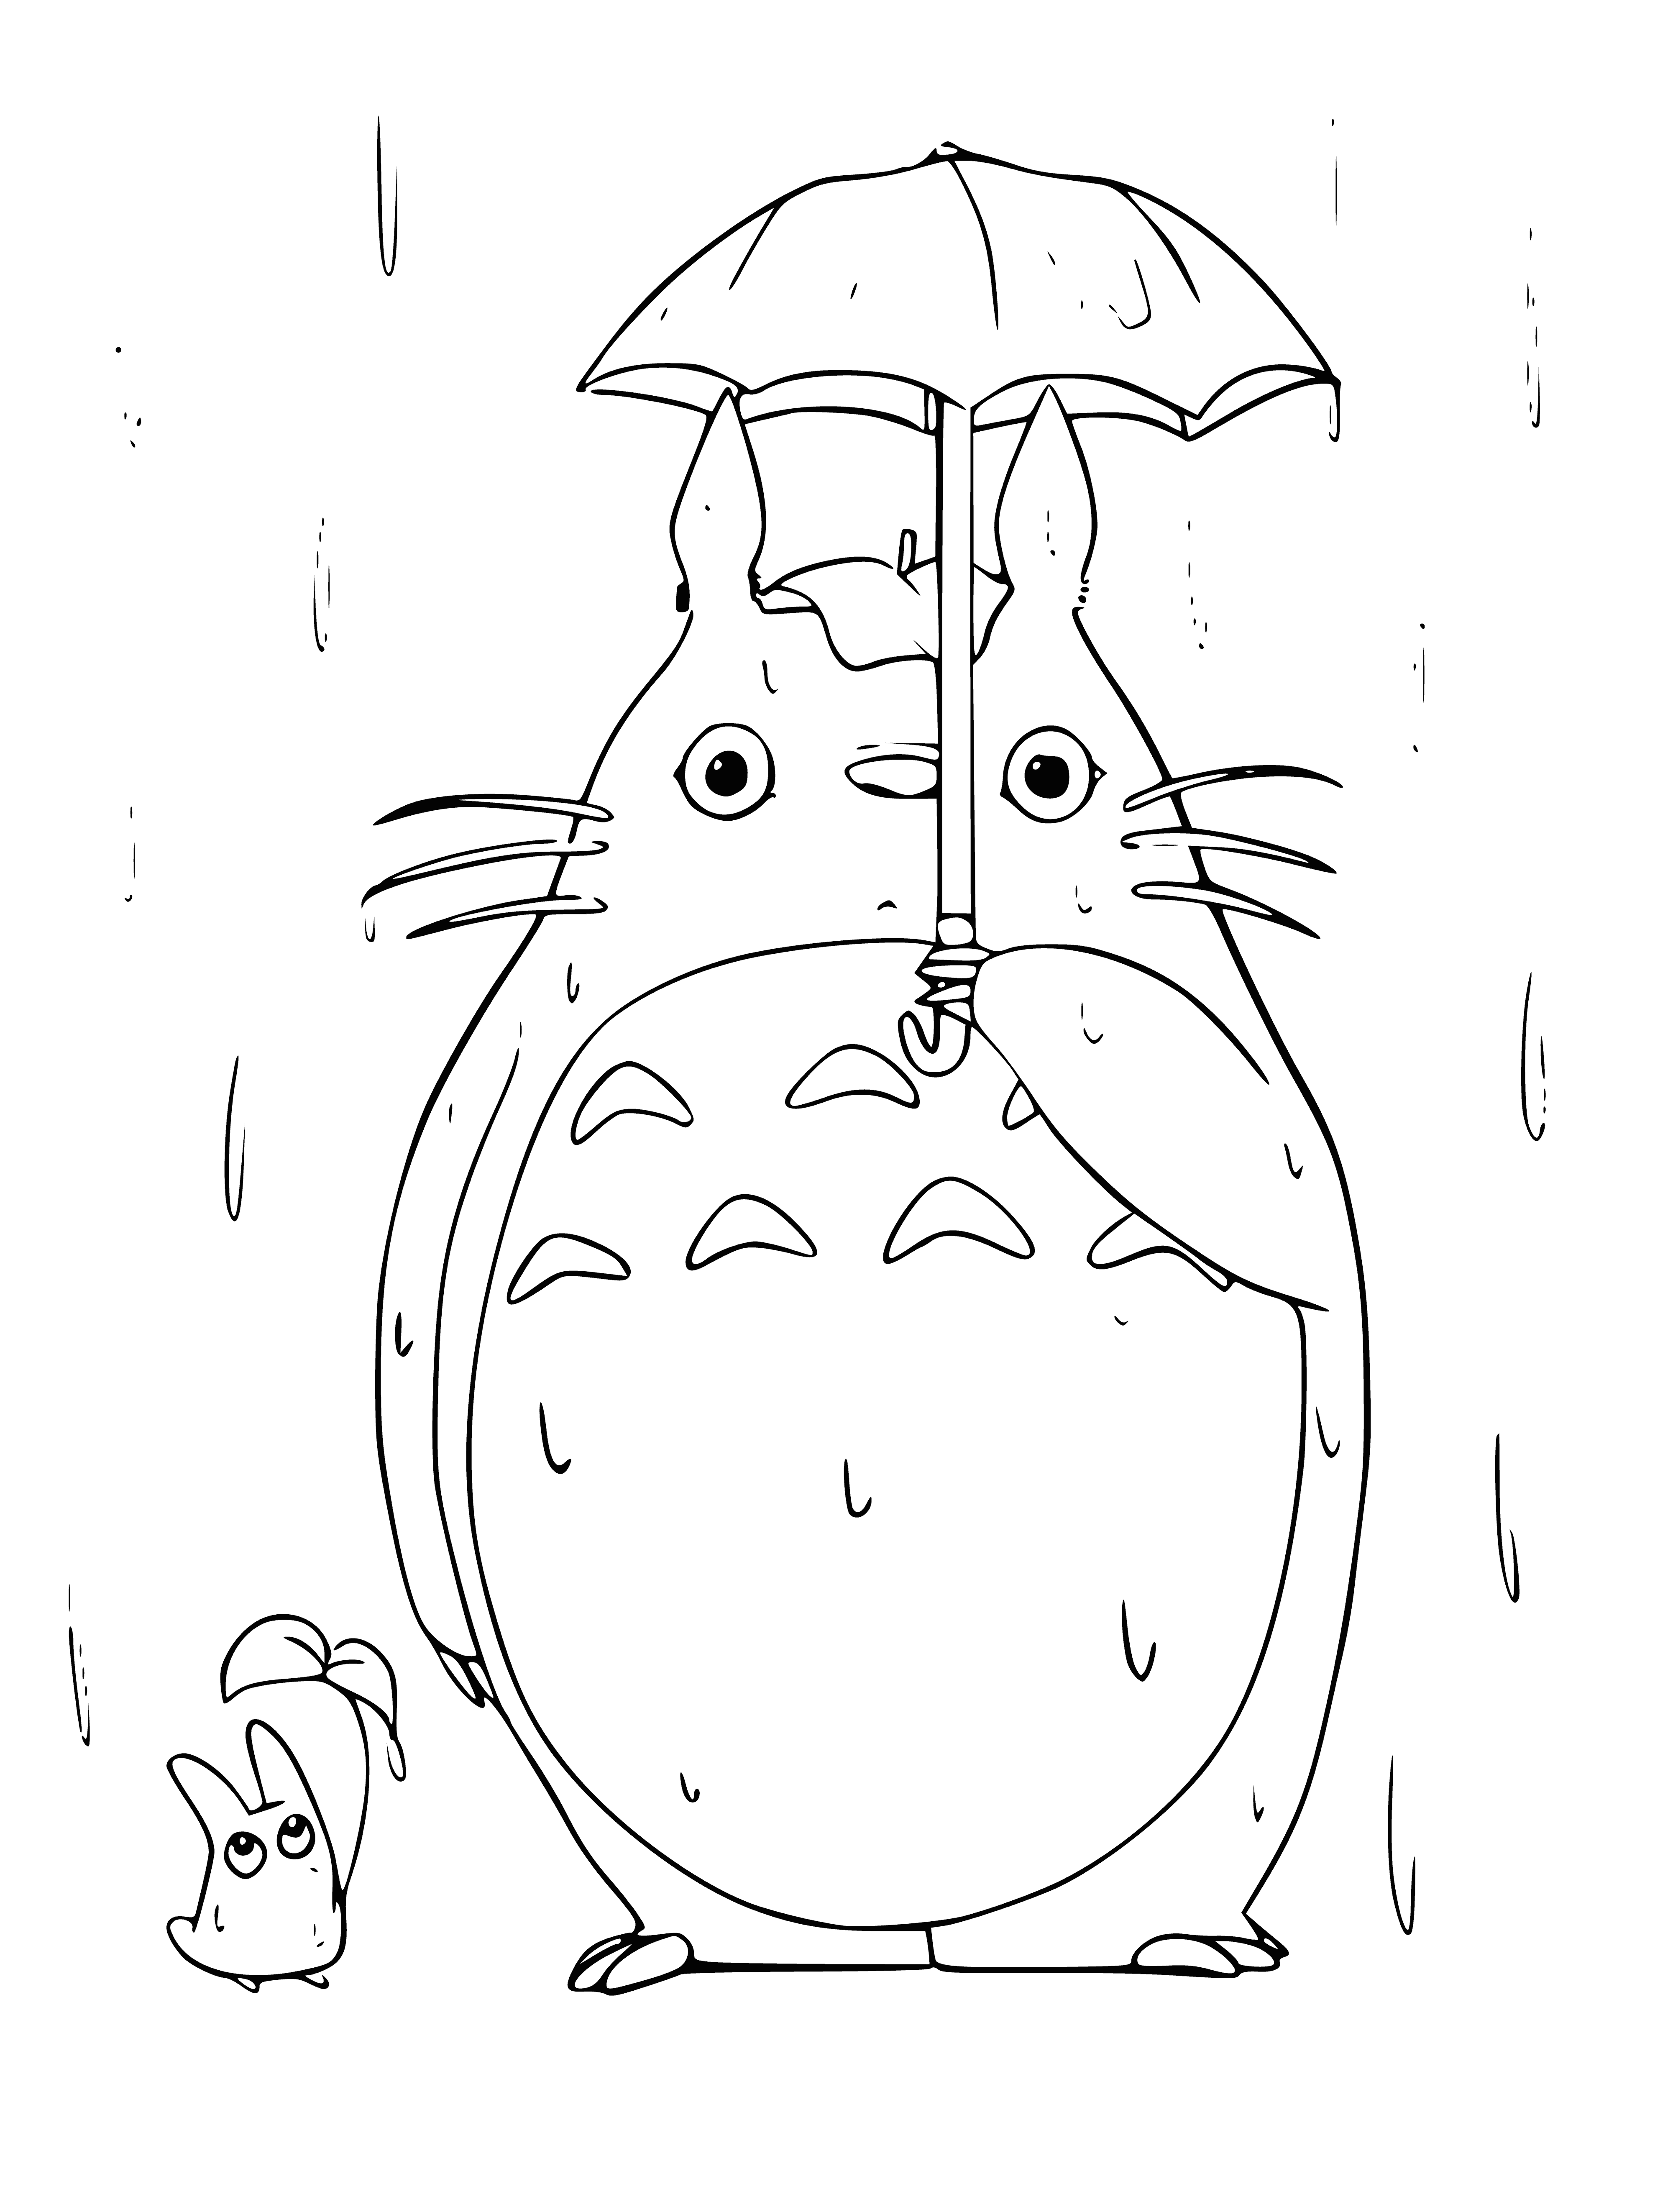 Totoro in the rain coloring page